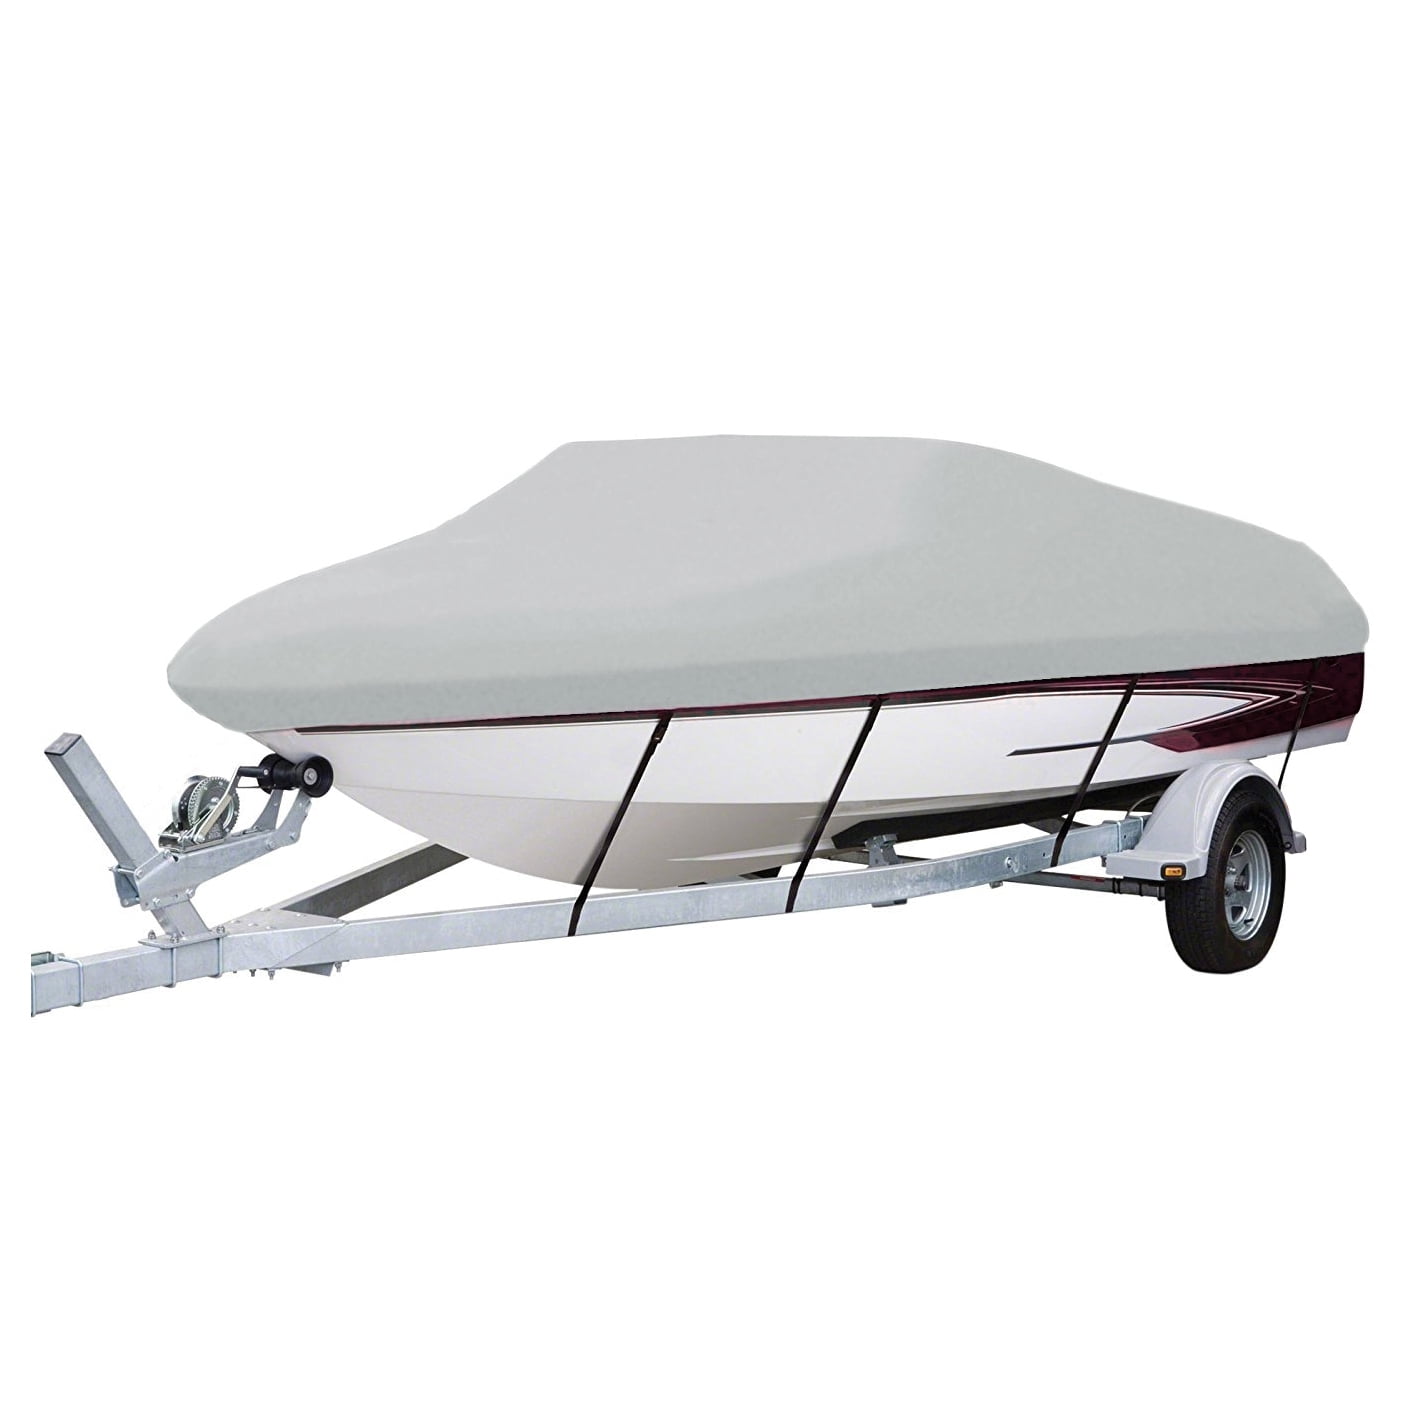 Trailerite Semi-Custom Boat Cover for Walk-Around Cuddy Cabin Boats with Inboard/Outboard Motor Motor Hood not Included 